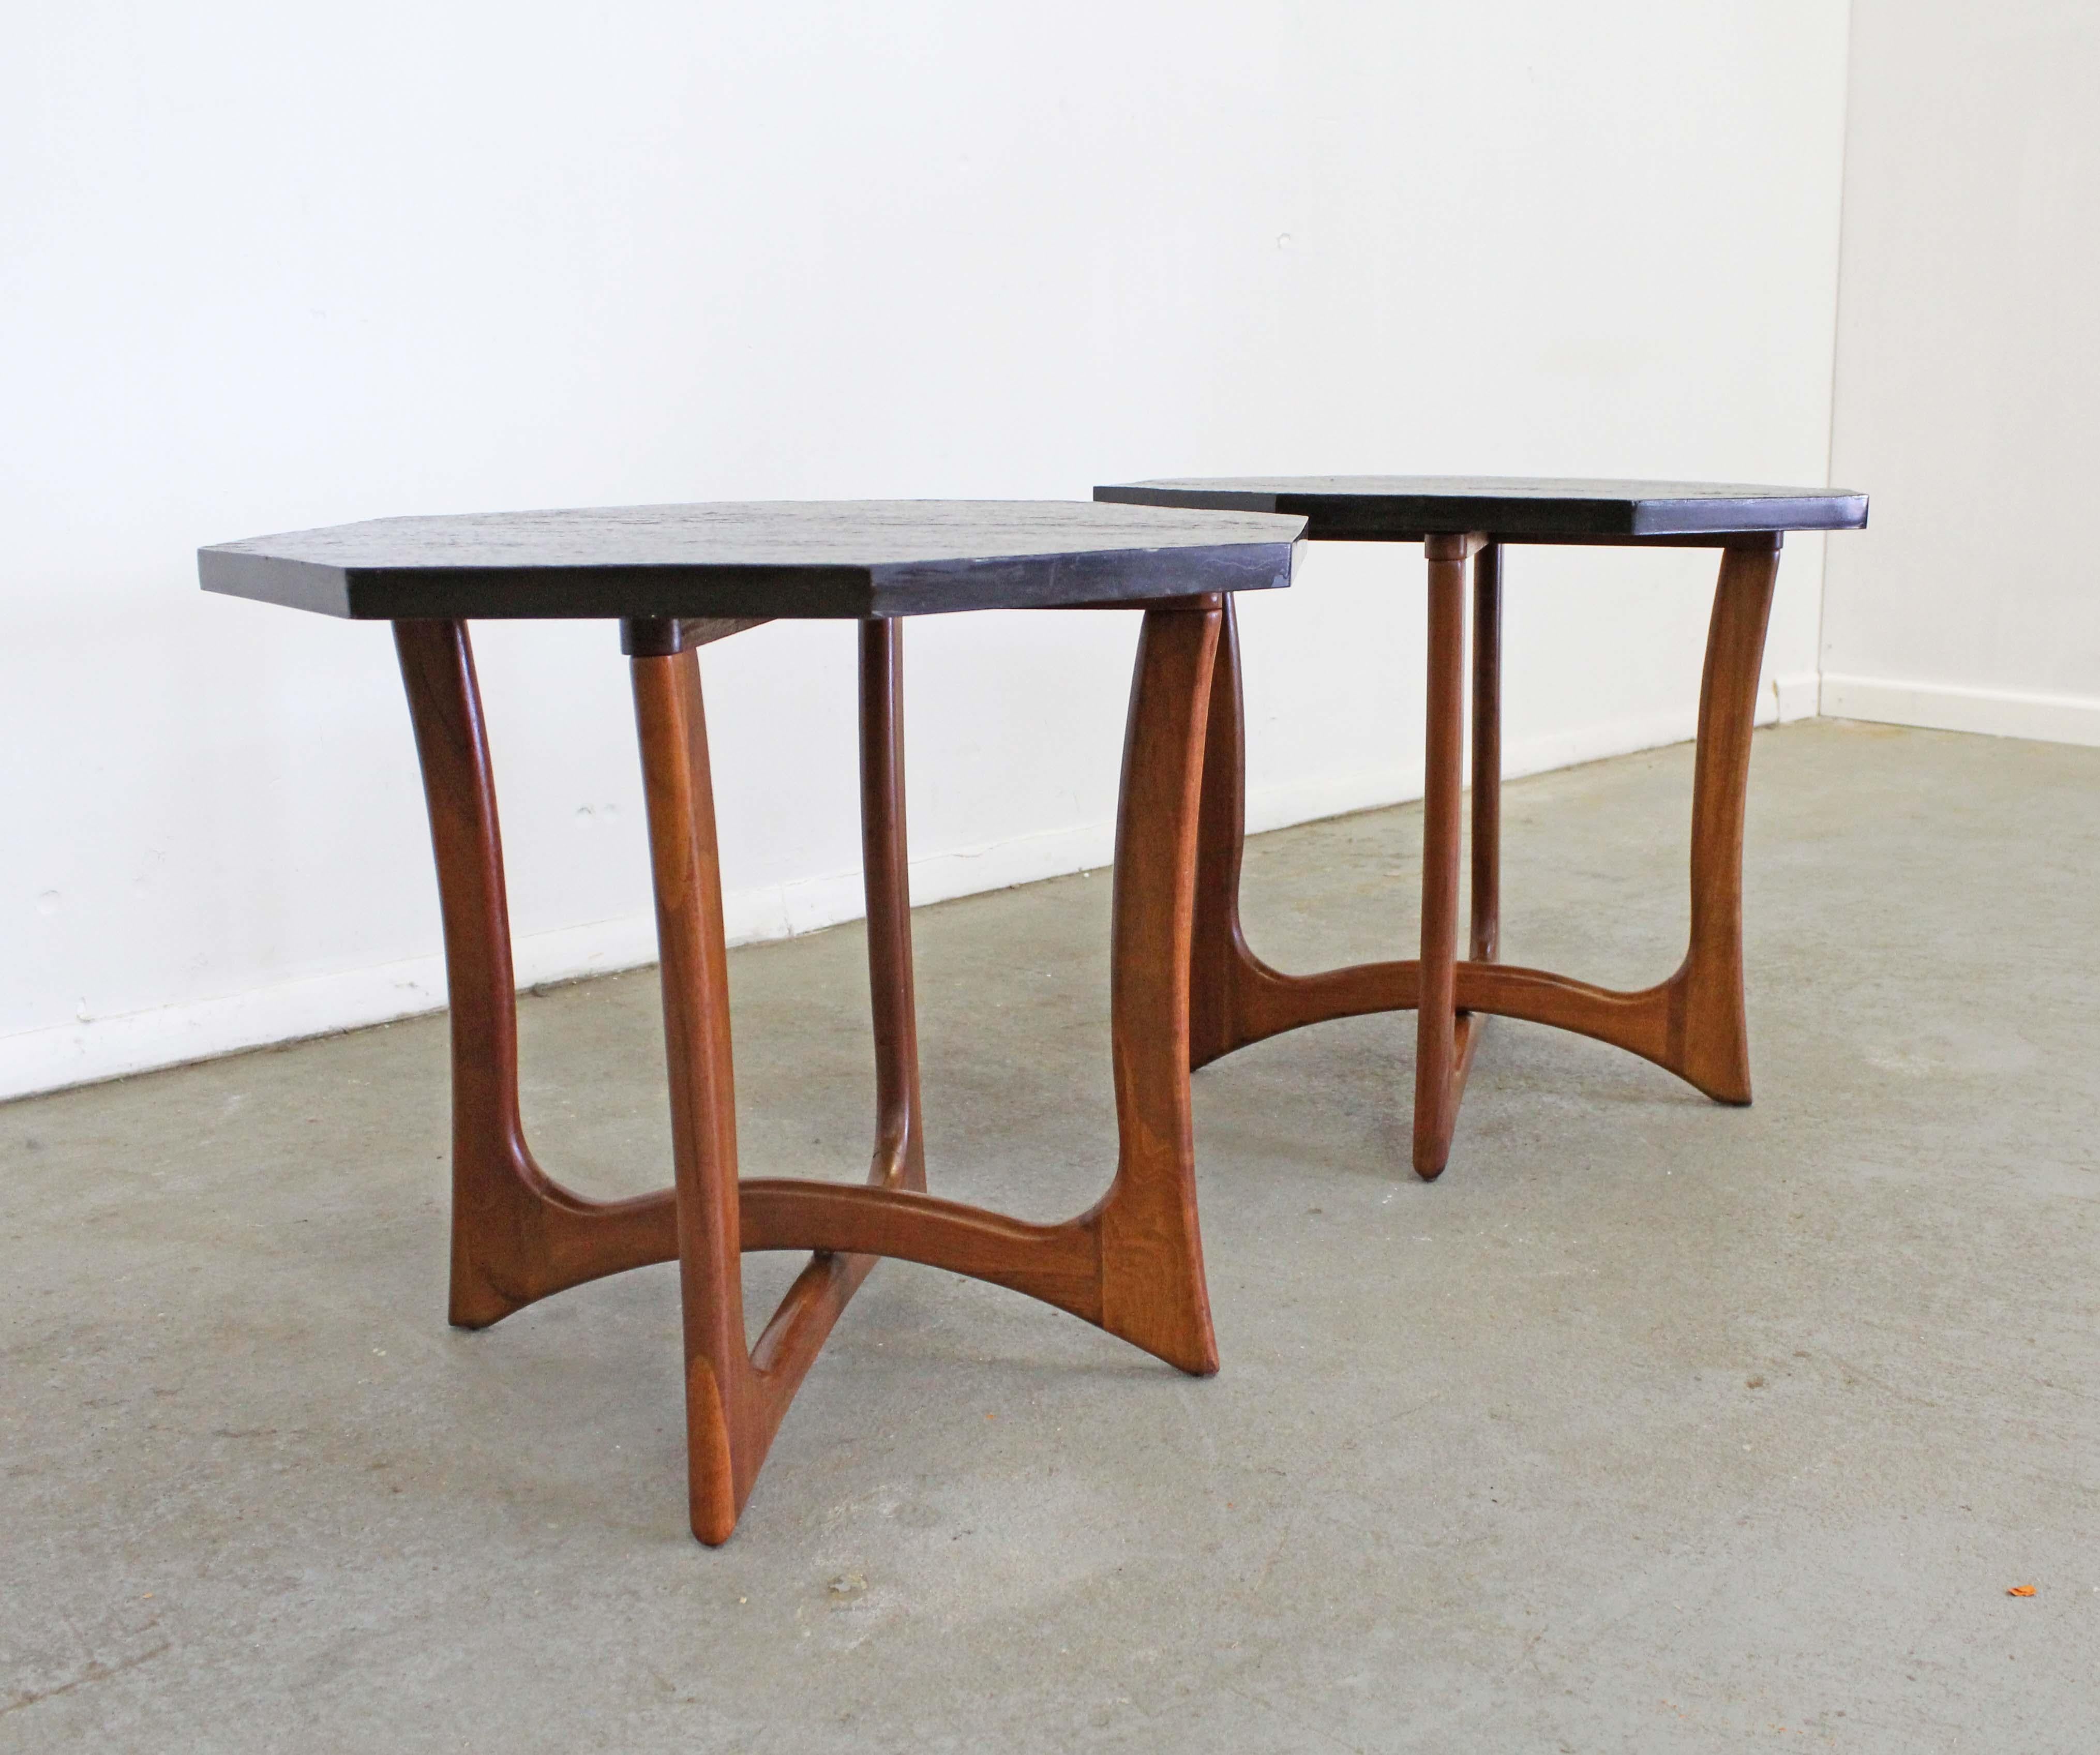 Offered is a pair of beautiful end tables designed by Adrian Pearsall fpr Craft Associates. These tables feature beautifully sculpted wood bases and removable hexagonal slate tops. They're in overall good condition with some age wear. Slate tops